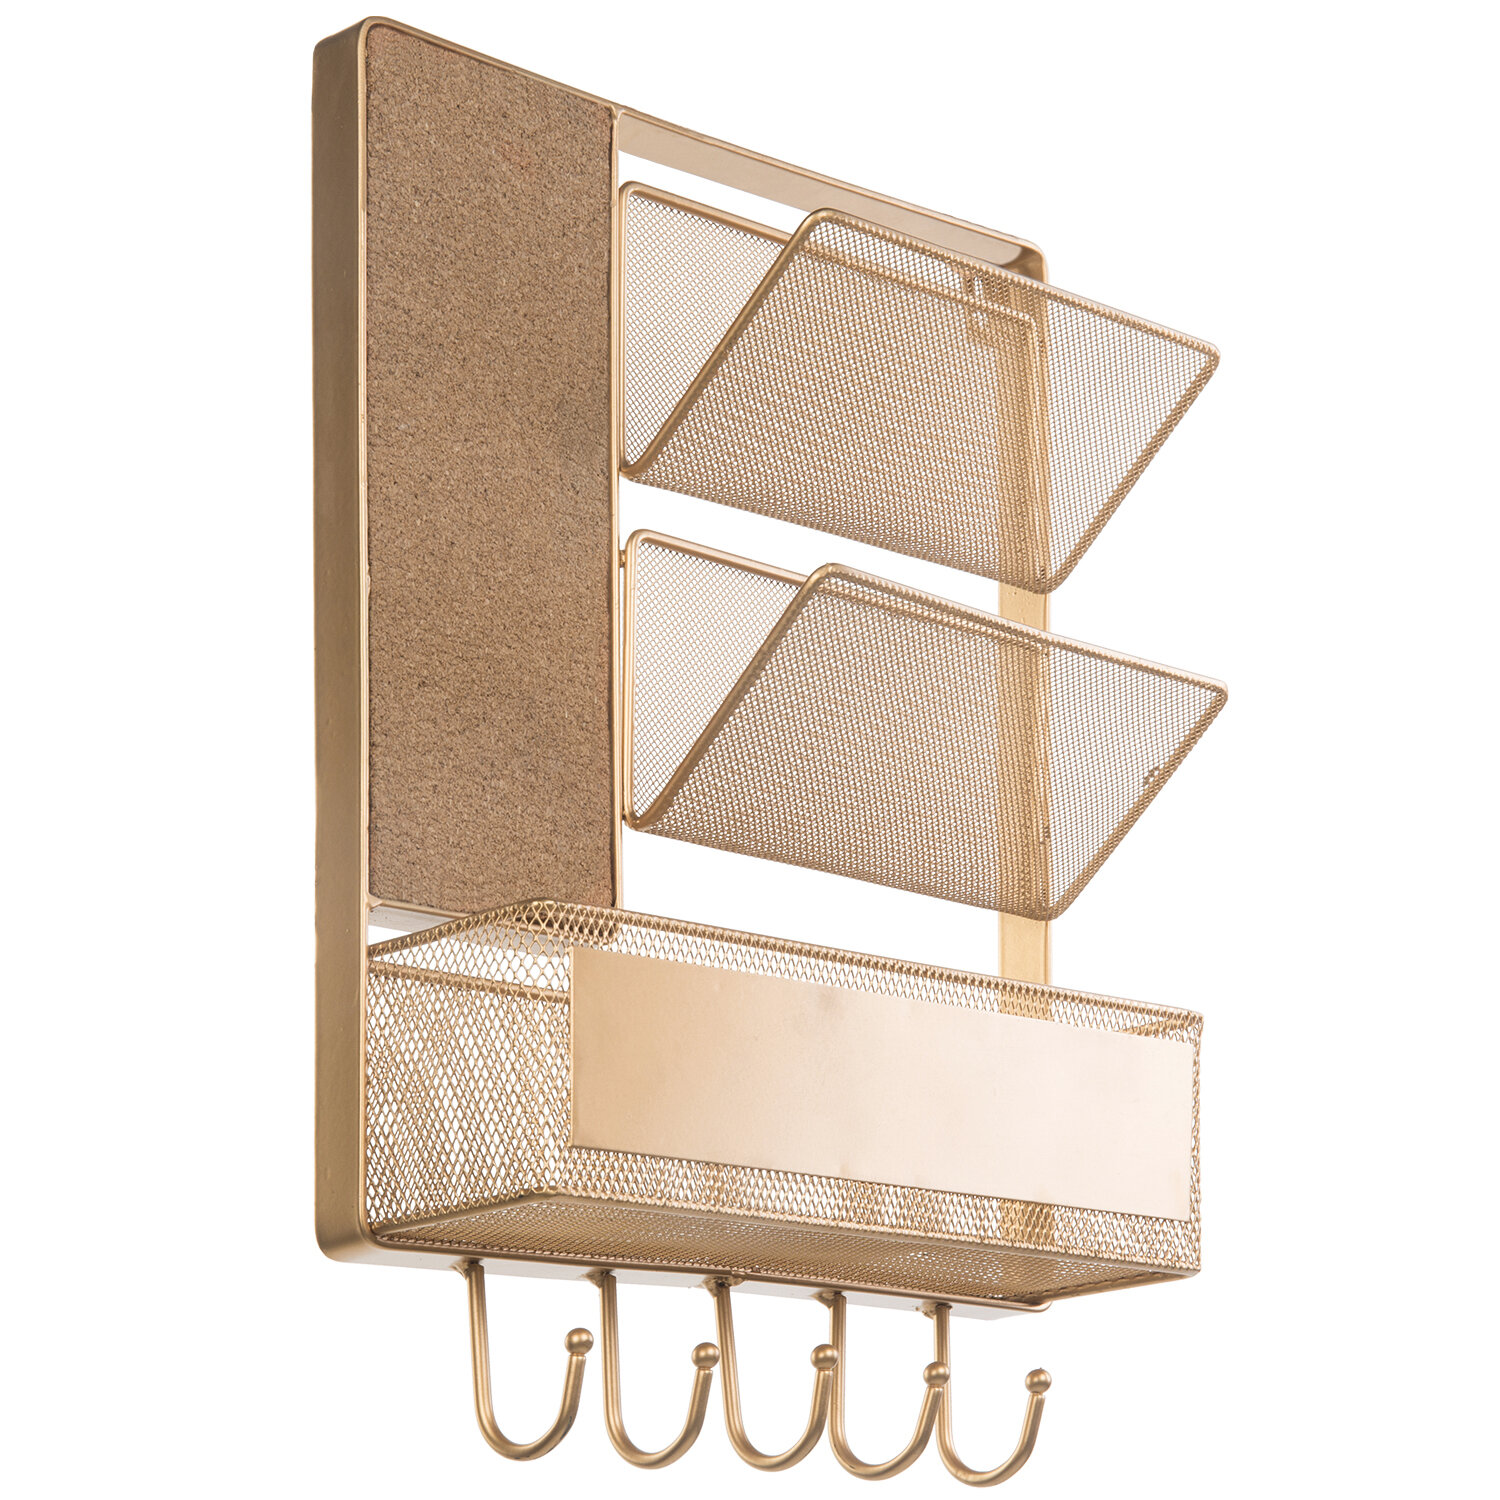 MyGift White Metal Mesh Mail Sorter Wall Rack with Corkboard and 5 Key Hooks 